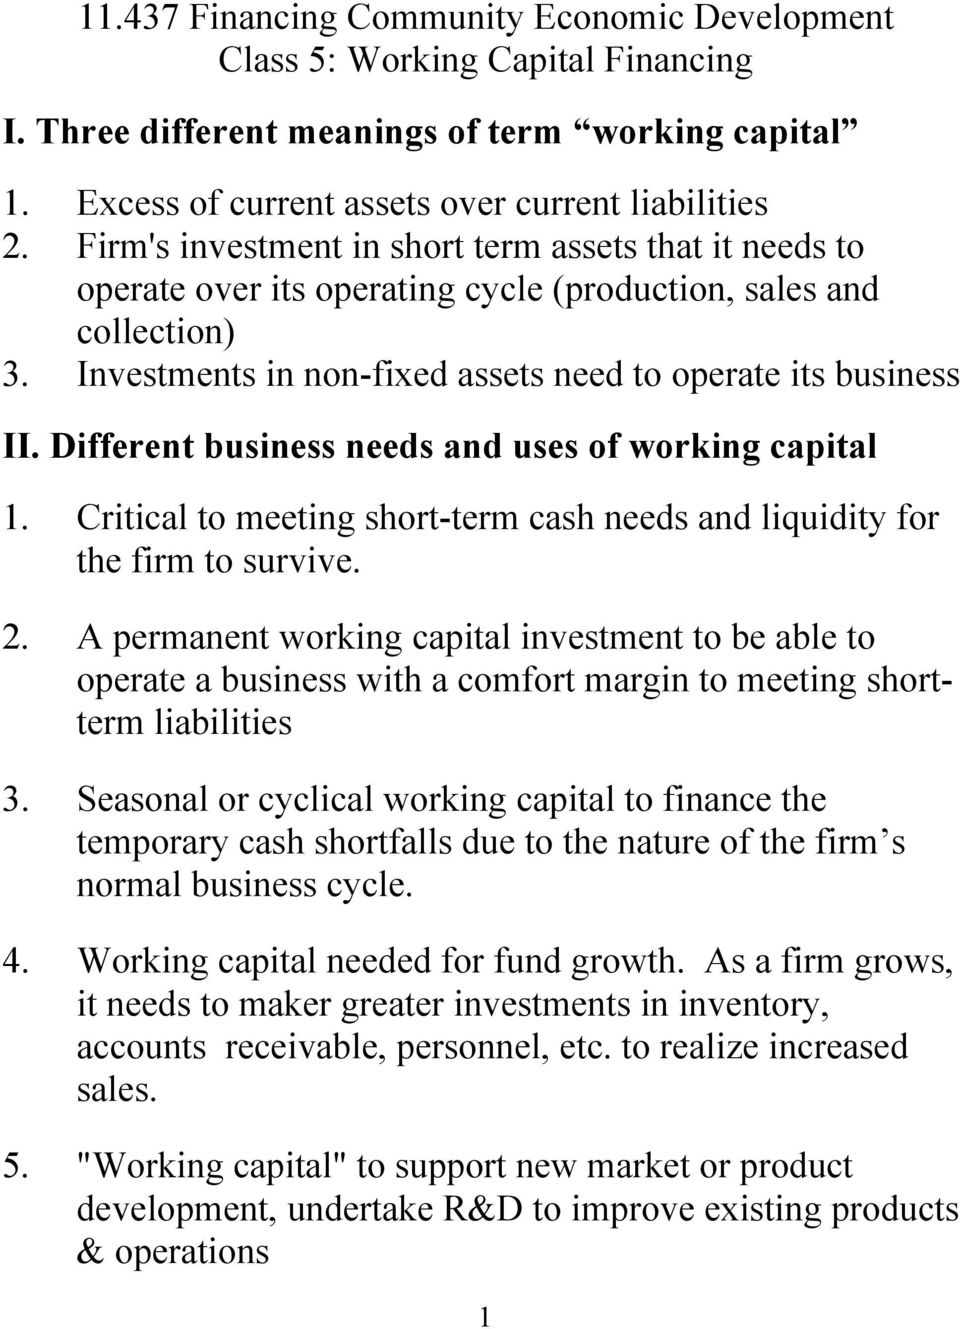 Different business needs and uses of working capital 1. Critical to meeting short-term cash needs and liquidity for the firm to survive. 2.